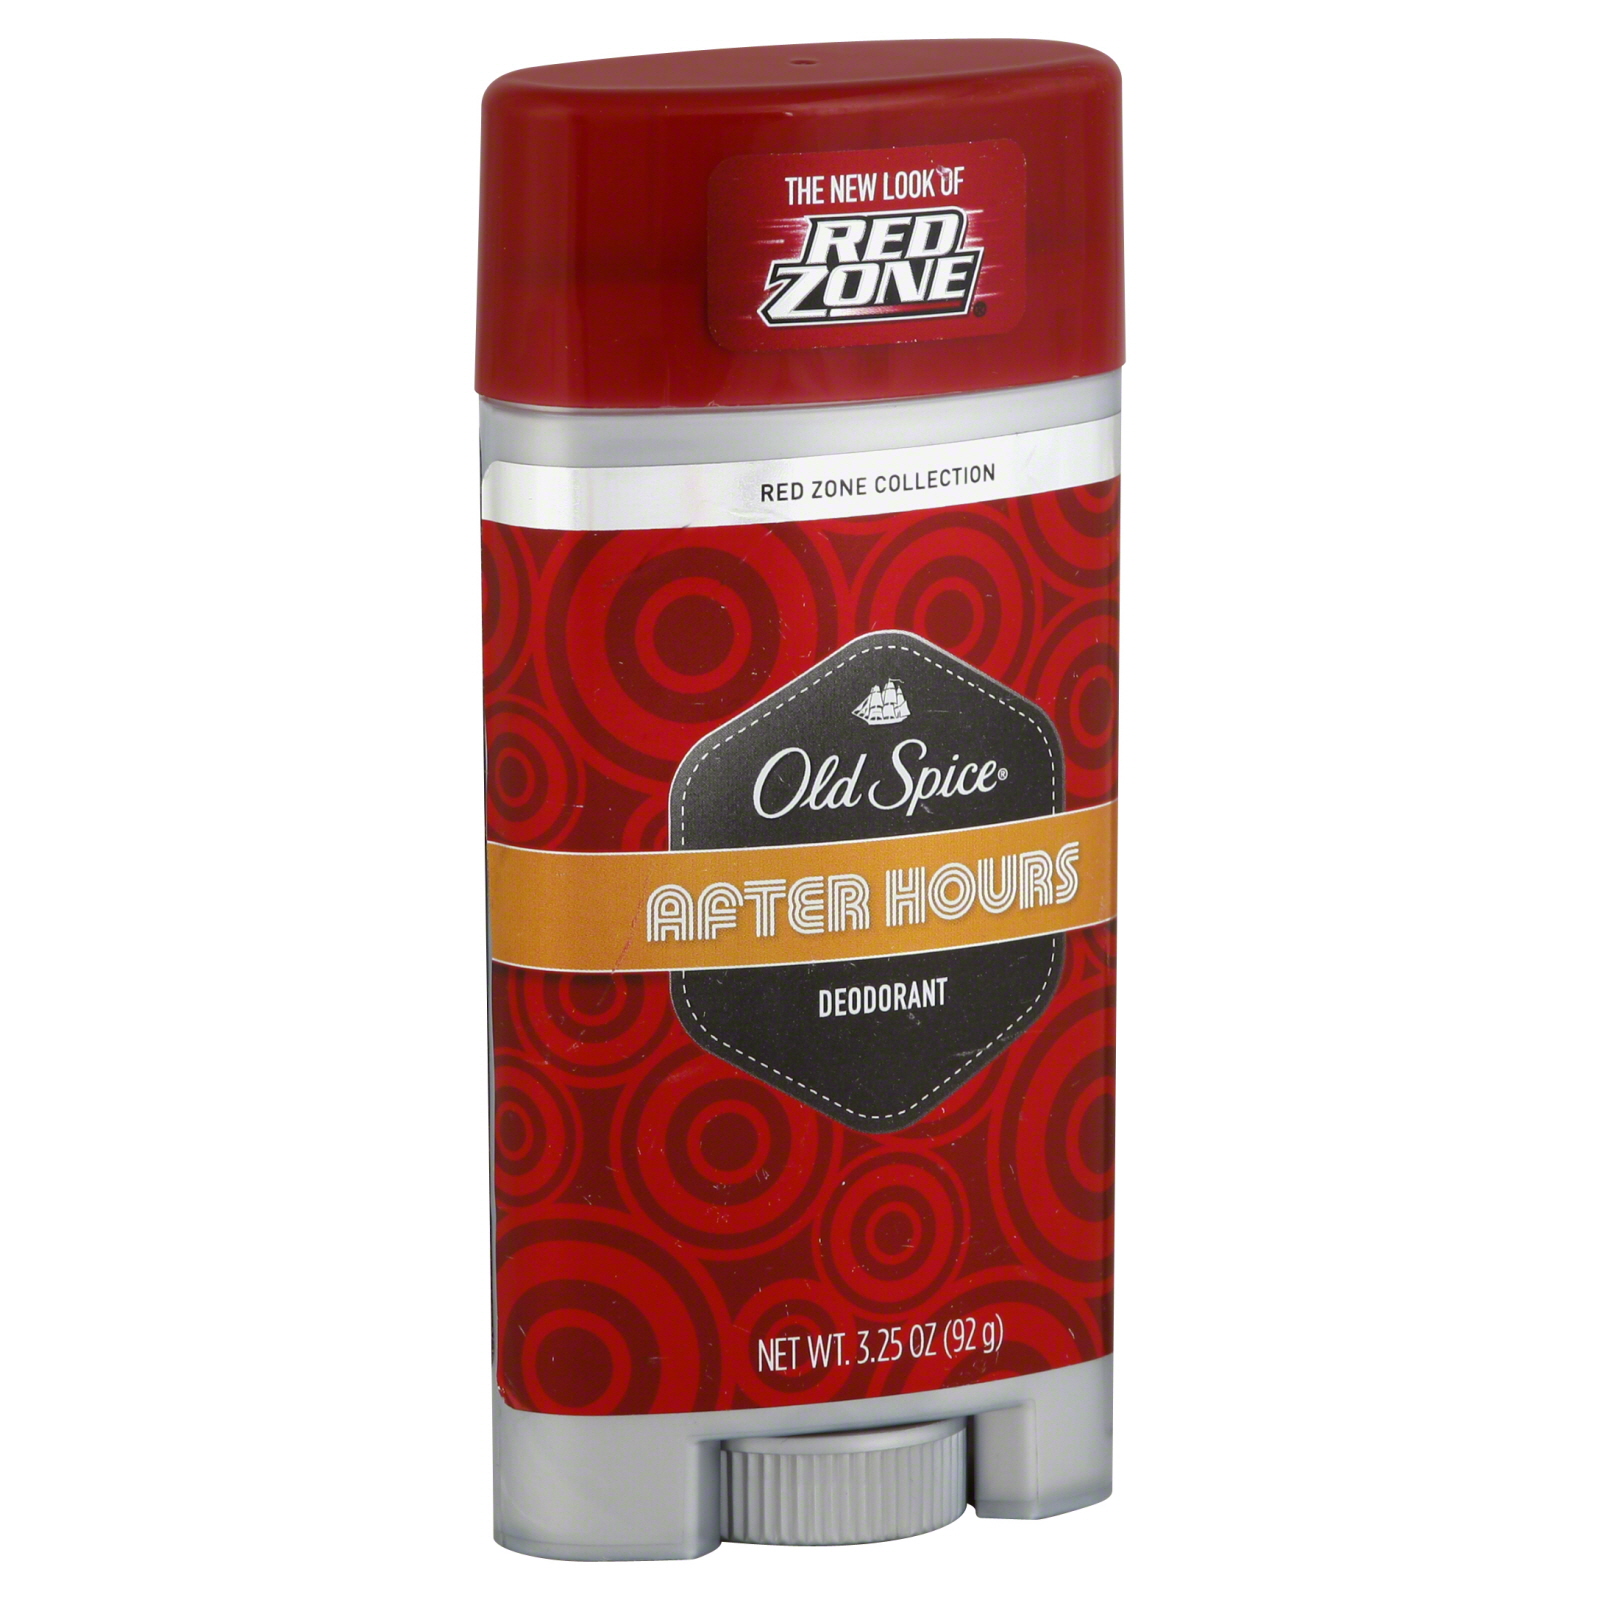 Old Spice Red Zone Collection Deodorant, After Hours, 3.25 oz (92 g)